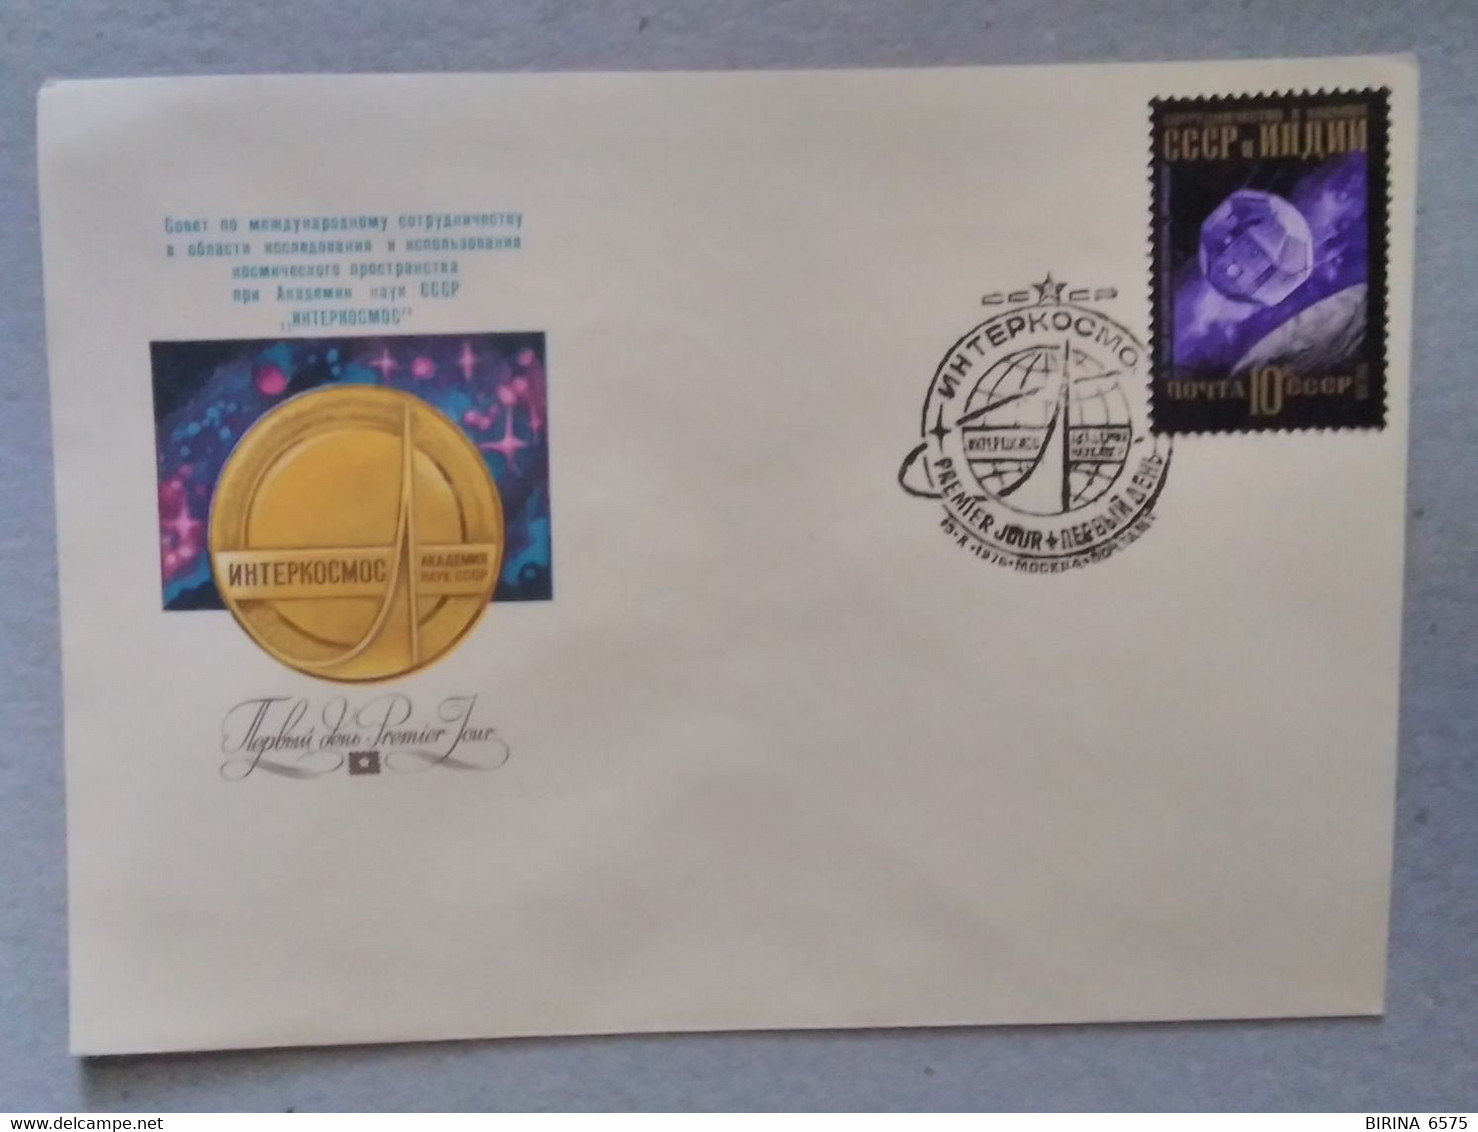 Astronautics. Cosmos. First Day. 1976. Stamp. Postal Envelope. Special Cancellation. Intercosmos. The USSR. - Colecciones